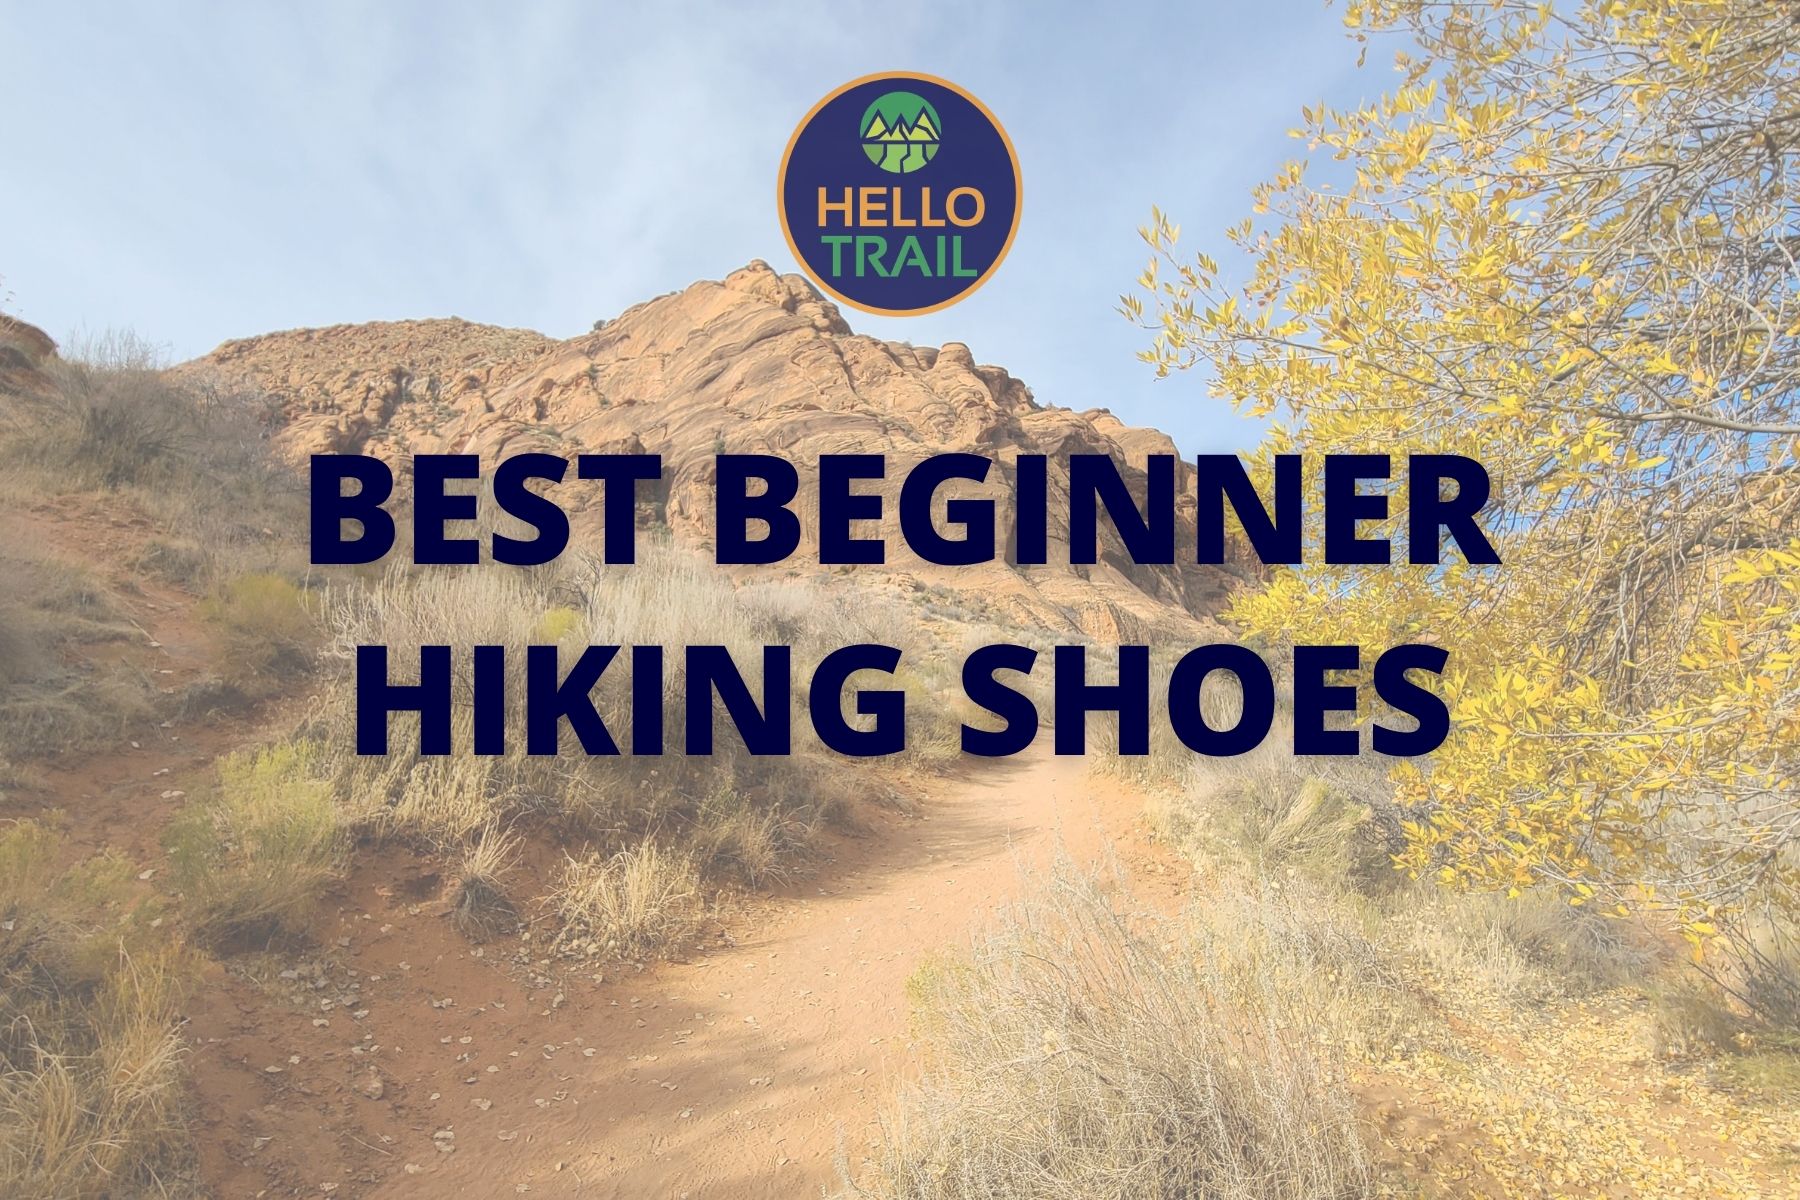 Best Beginner Hiking Shoes for Women and Men - HelloTrail.com